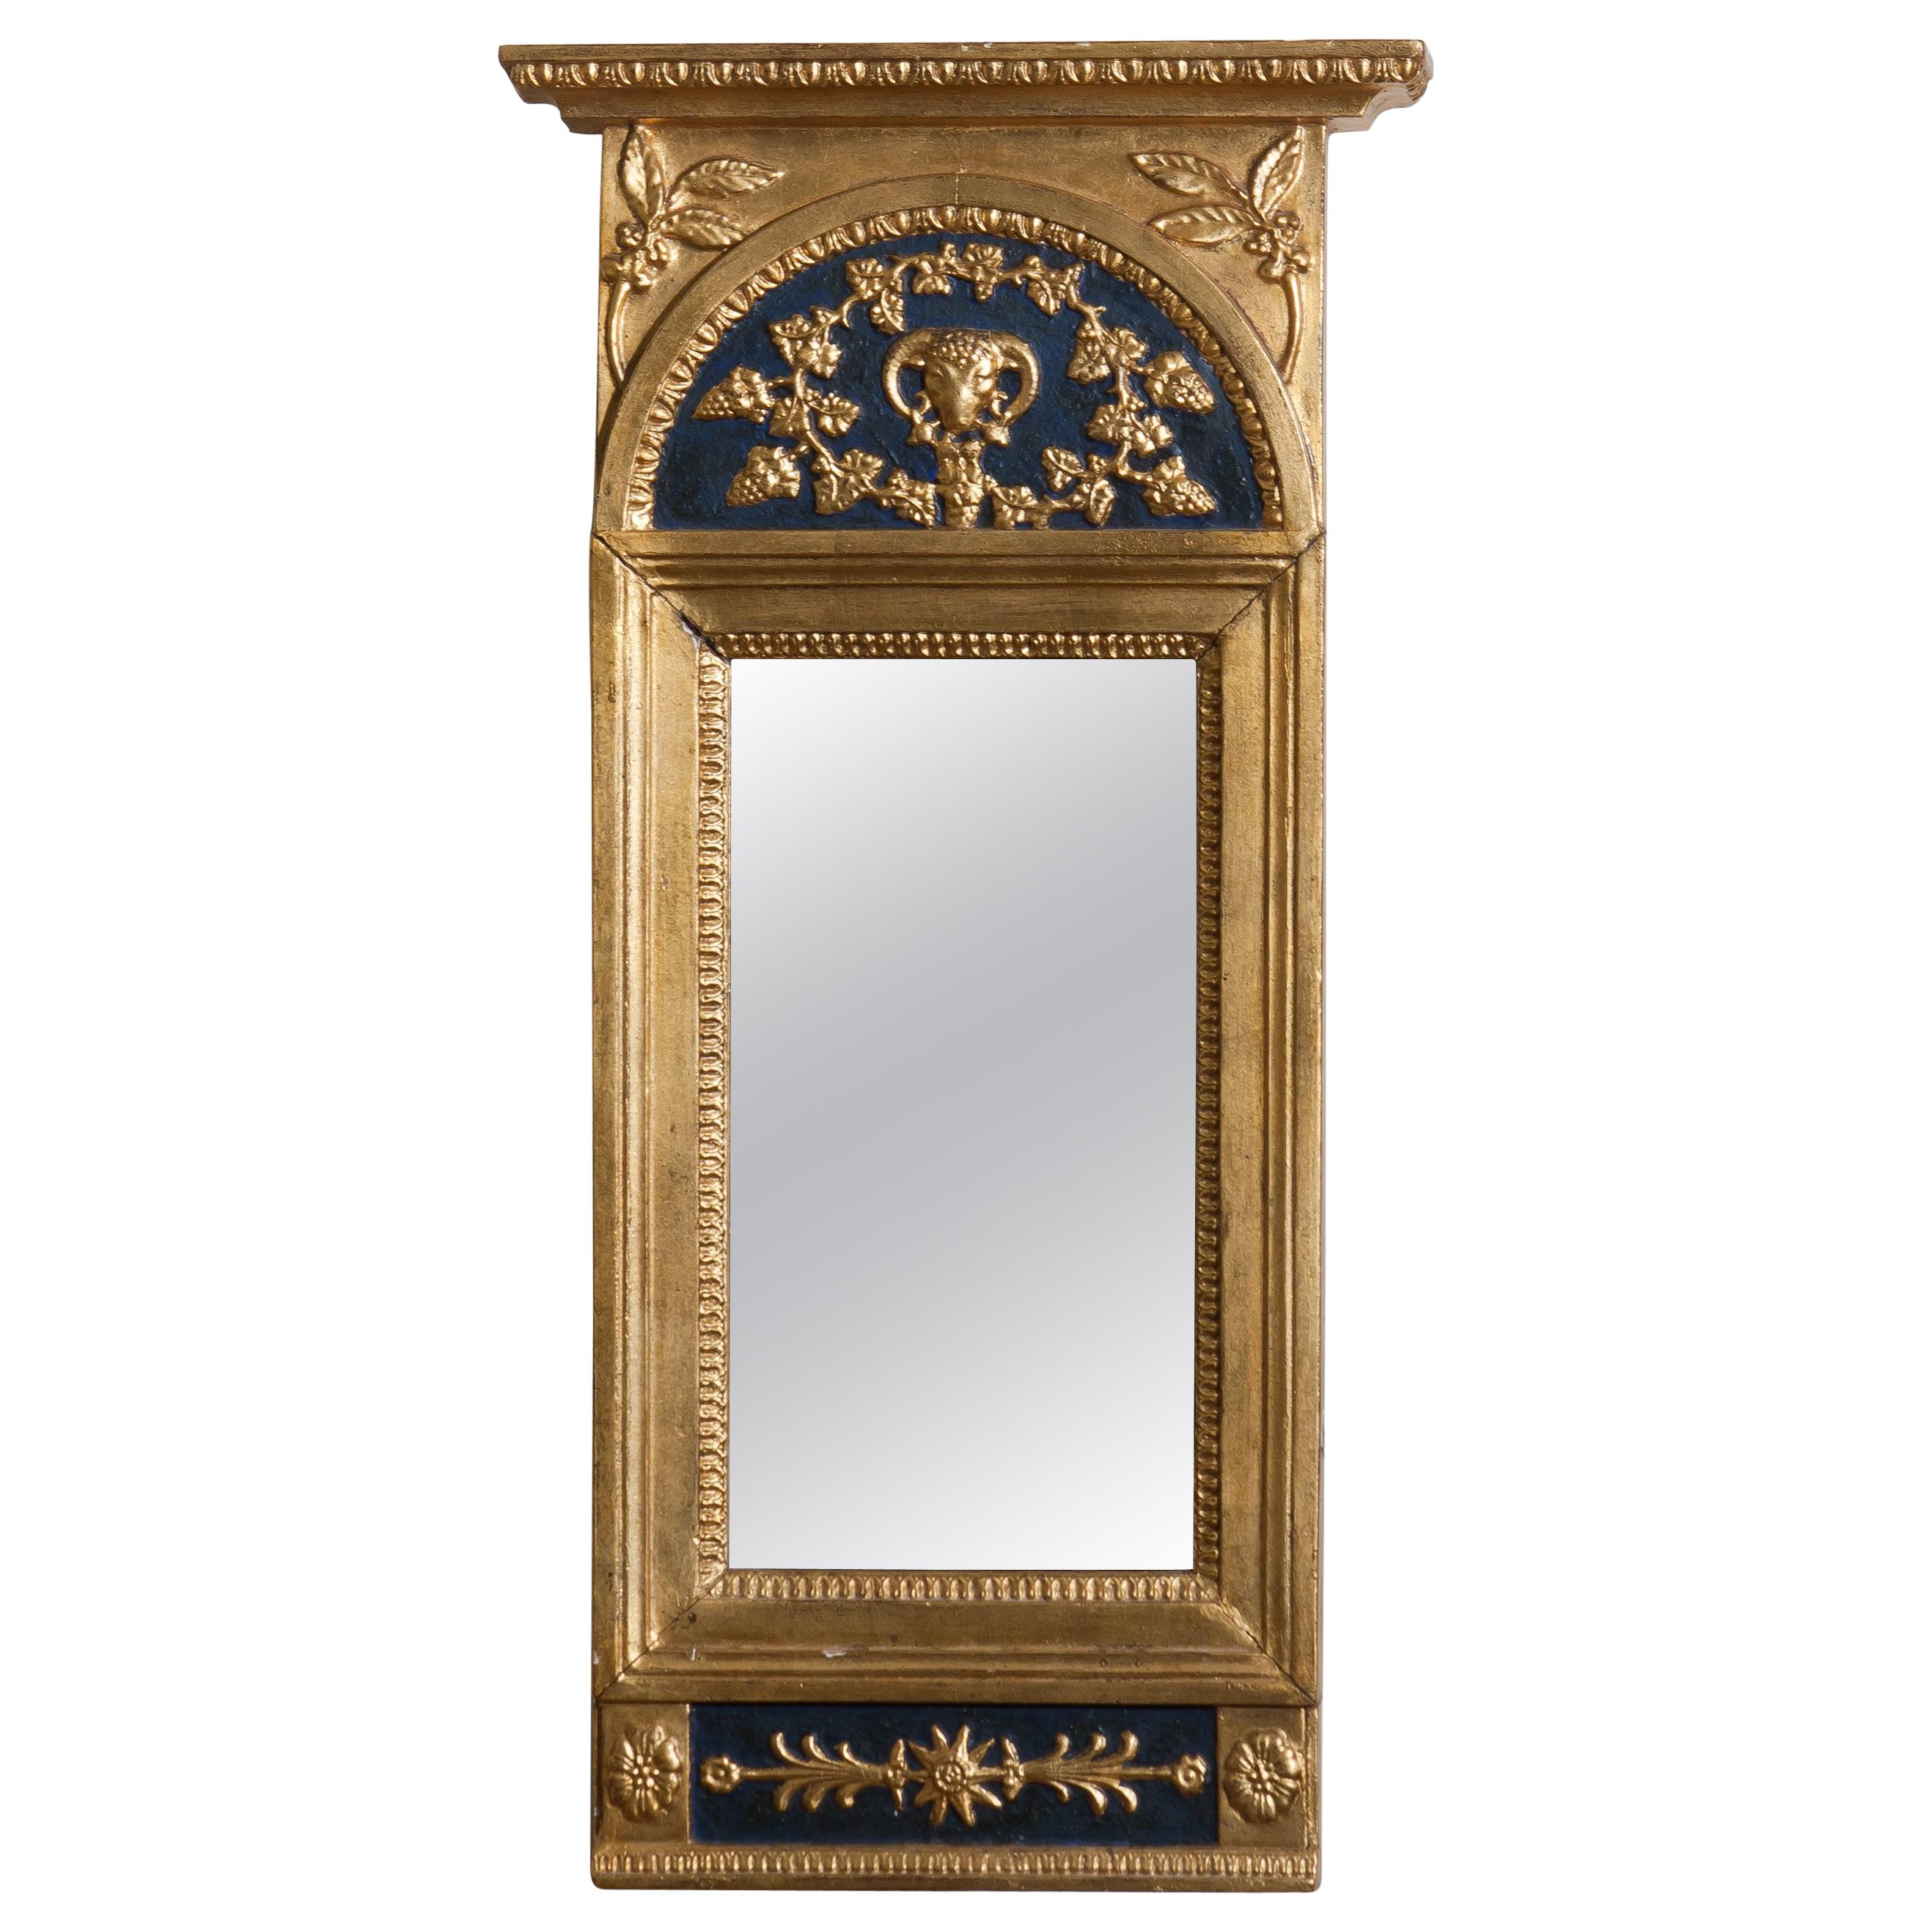 Gilded / panted Empire mirror, first half of the 1800s.
The mirror is in a later period restored and partly newly panted.
Overall condition is good.
 